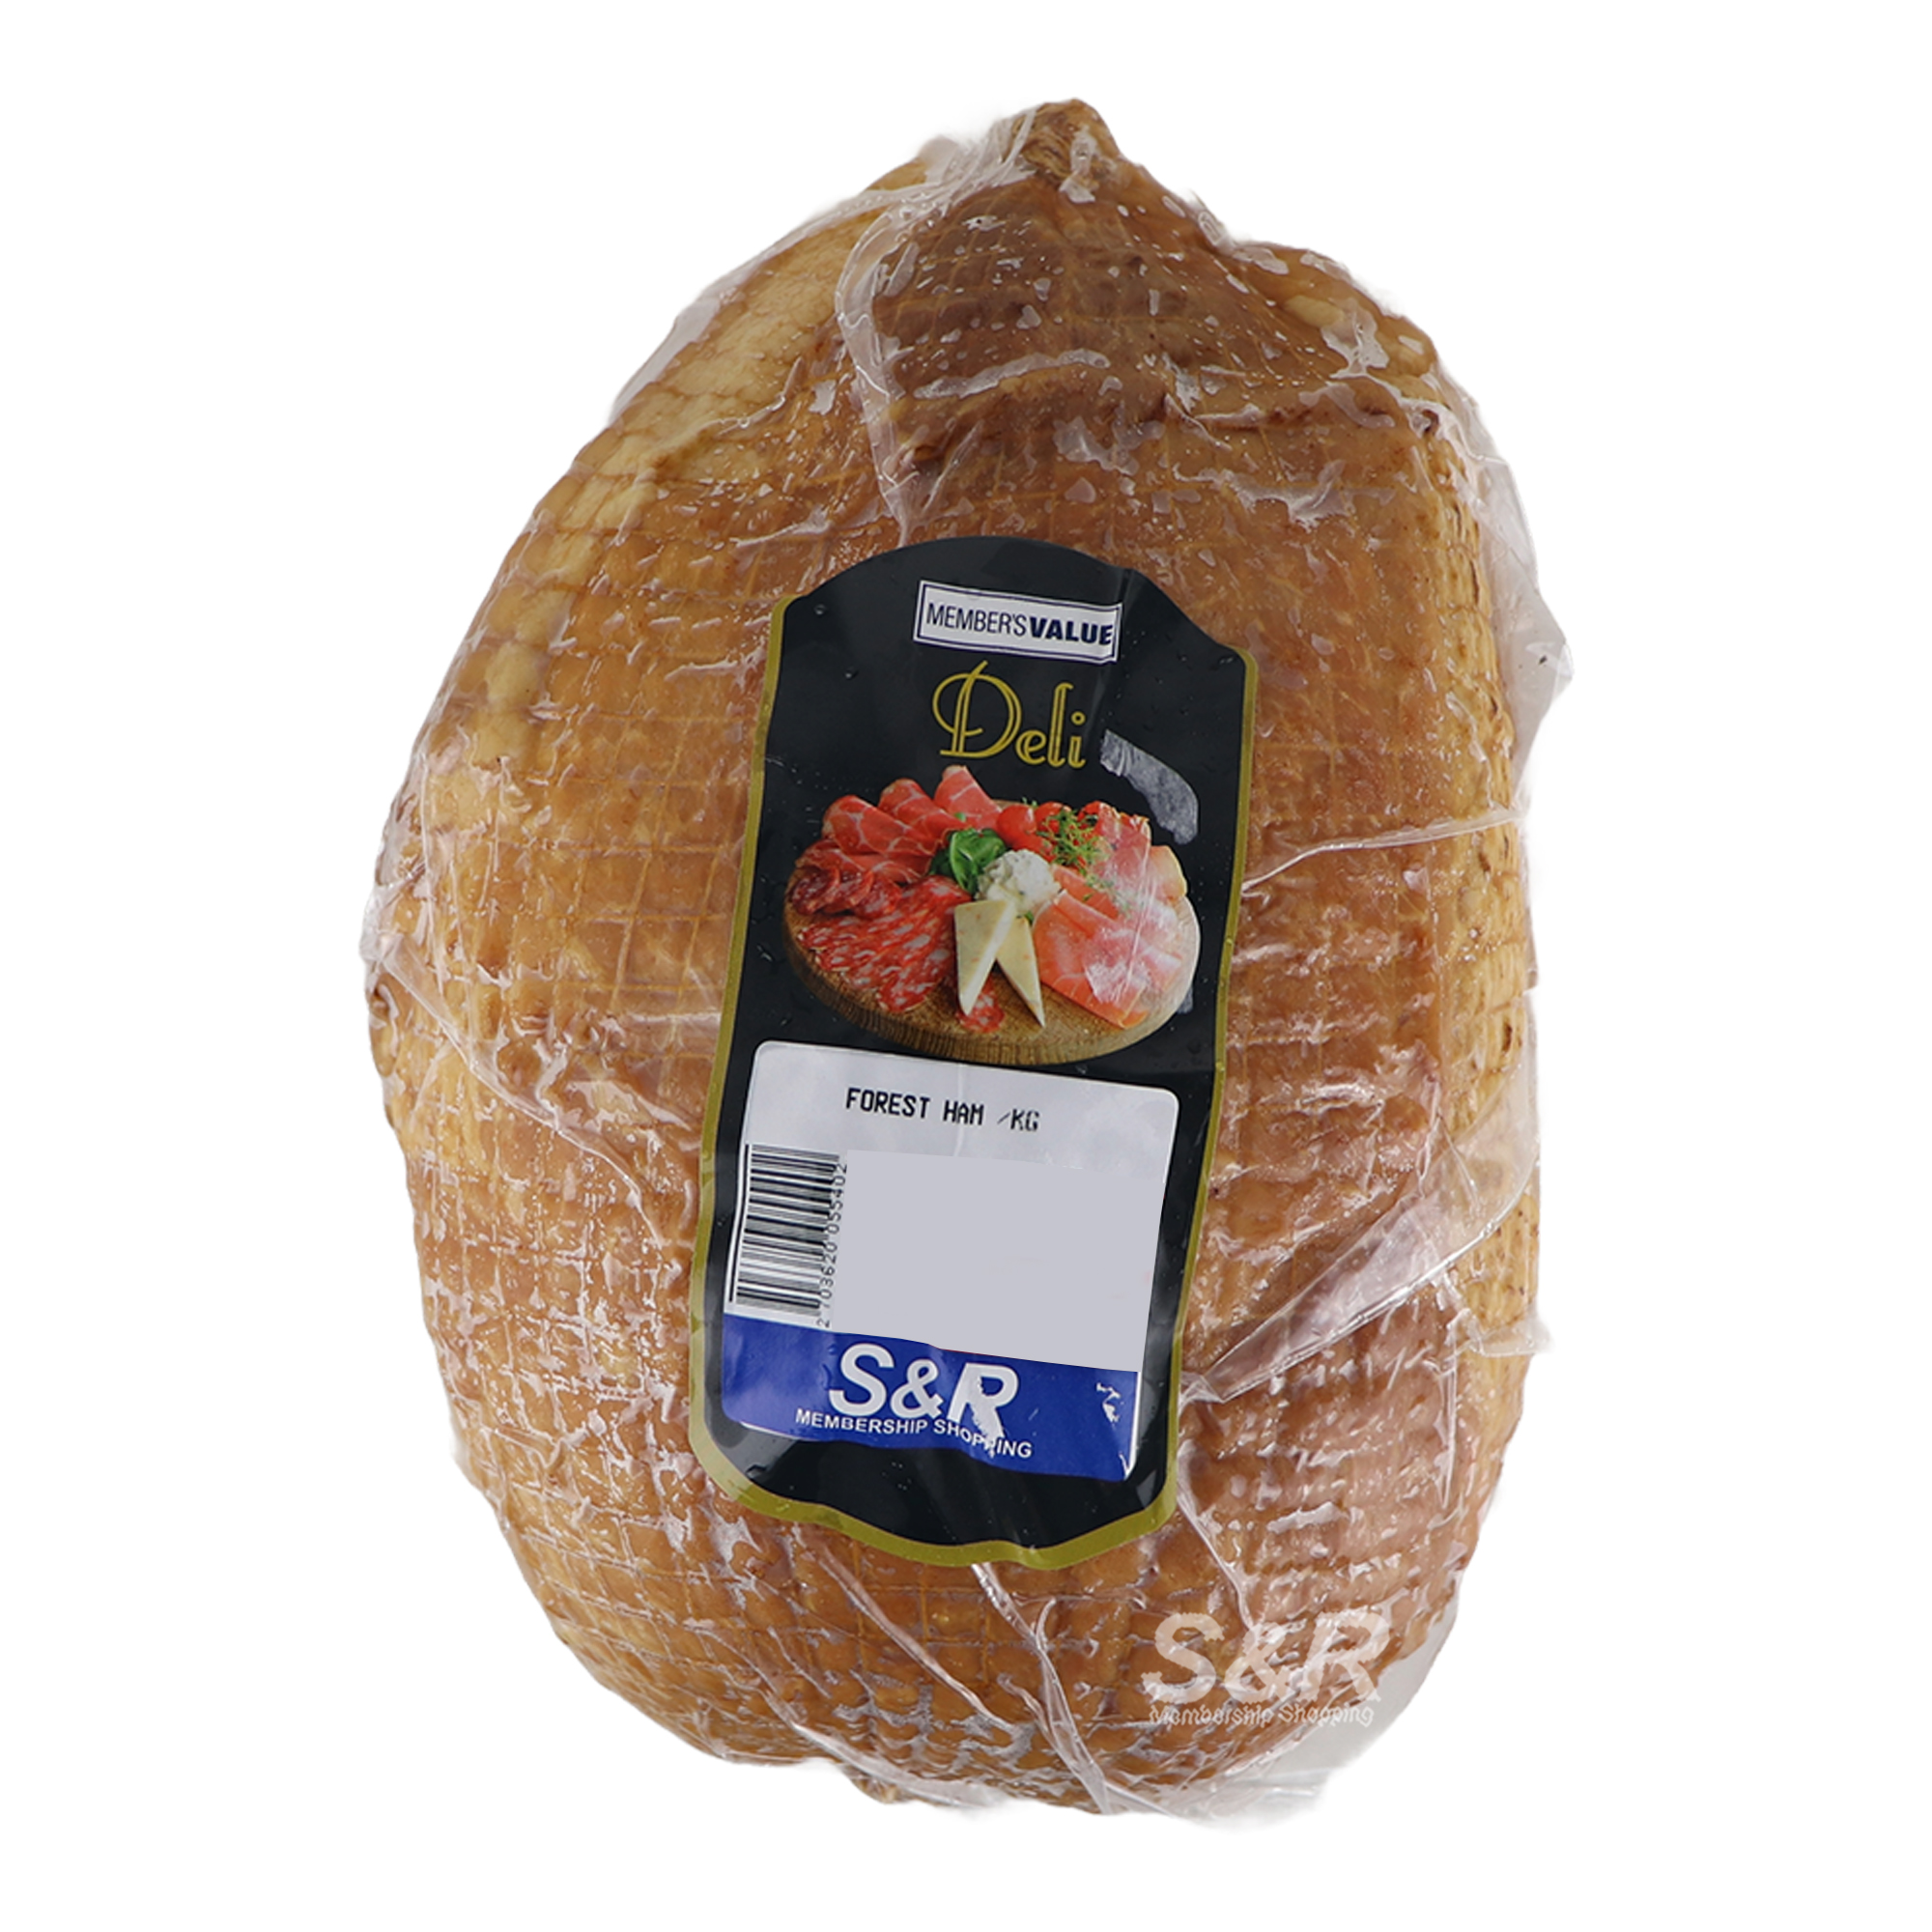 Member's Value Deli Forest Ham approx. 1kg